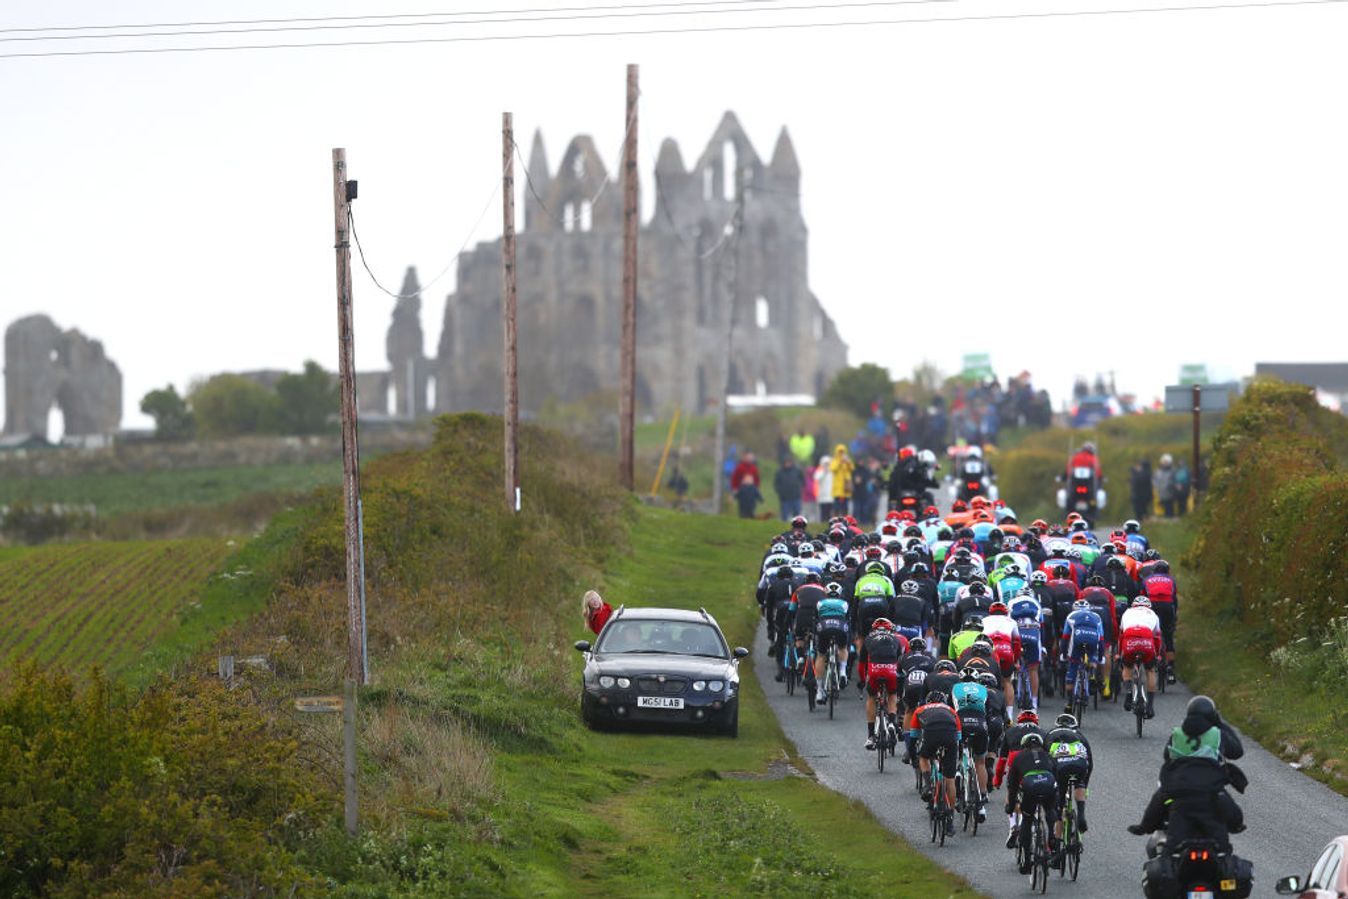 Whitby’s famous abbey watches over riders at the 2019 Tour of Yorkshire.